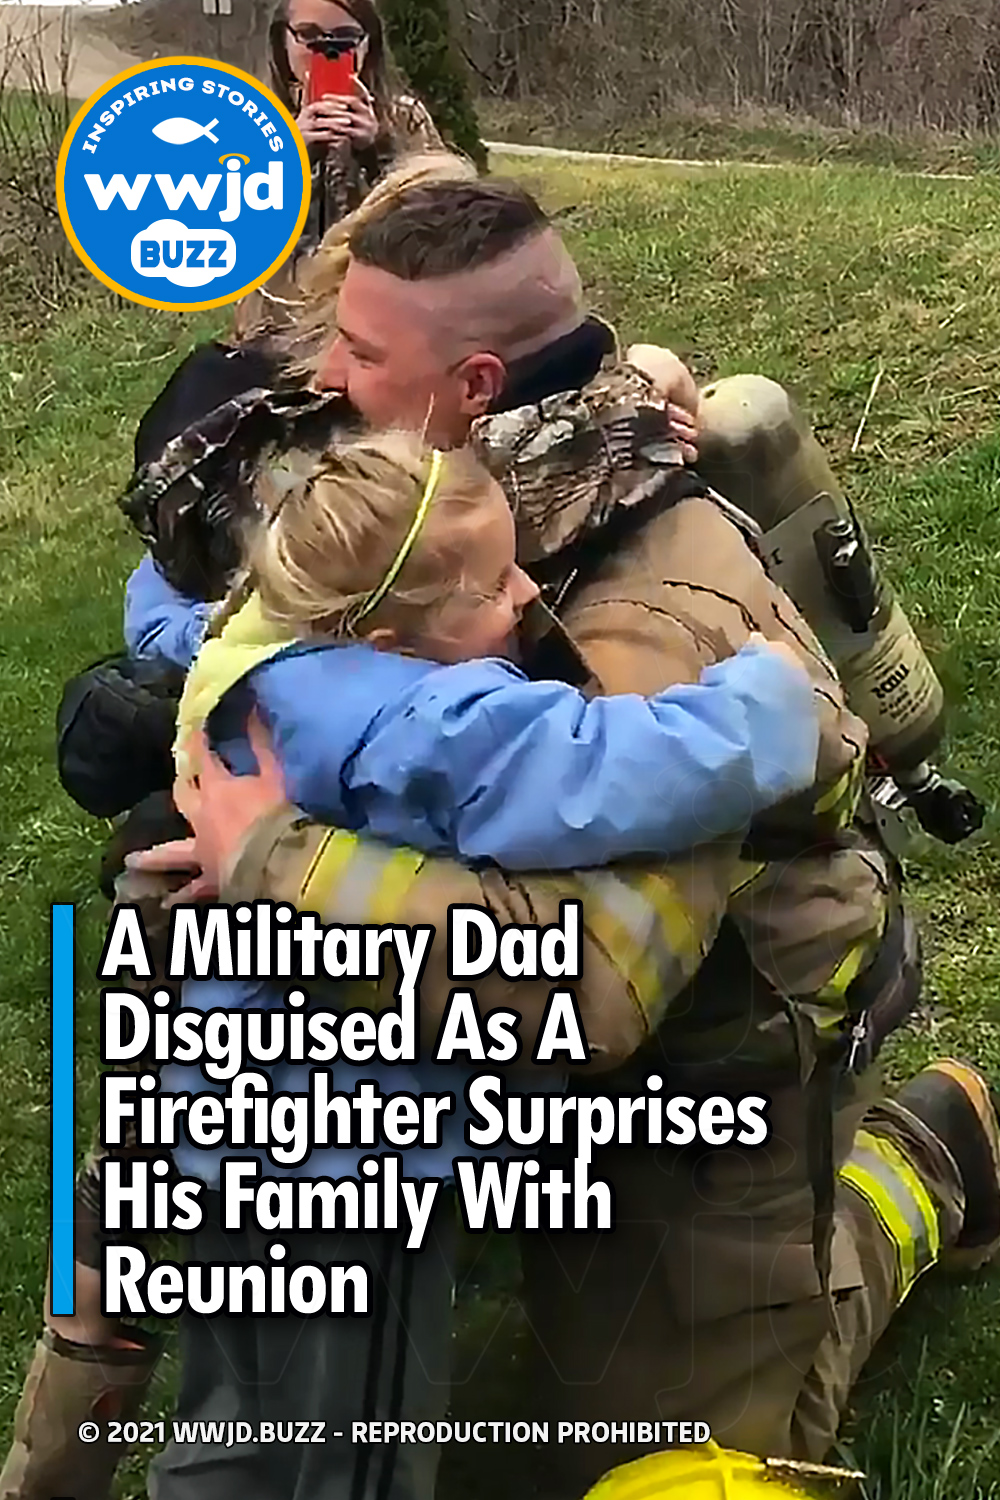 A Military Dad Disguised As A Firefighter Surprises His Family With Reunion